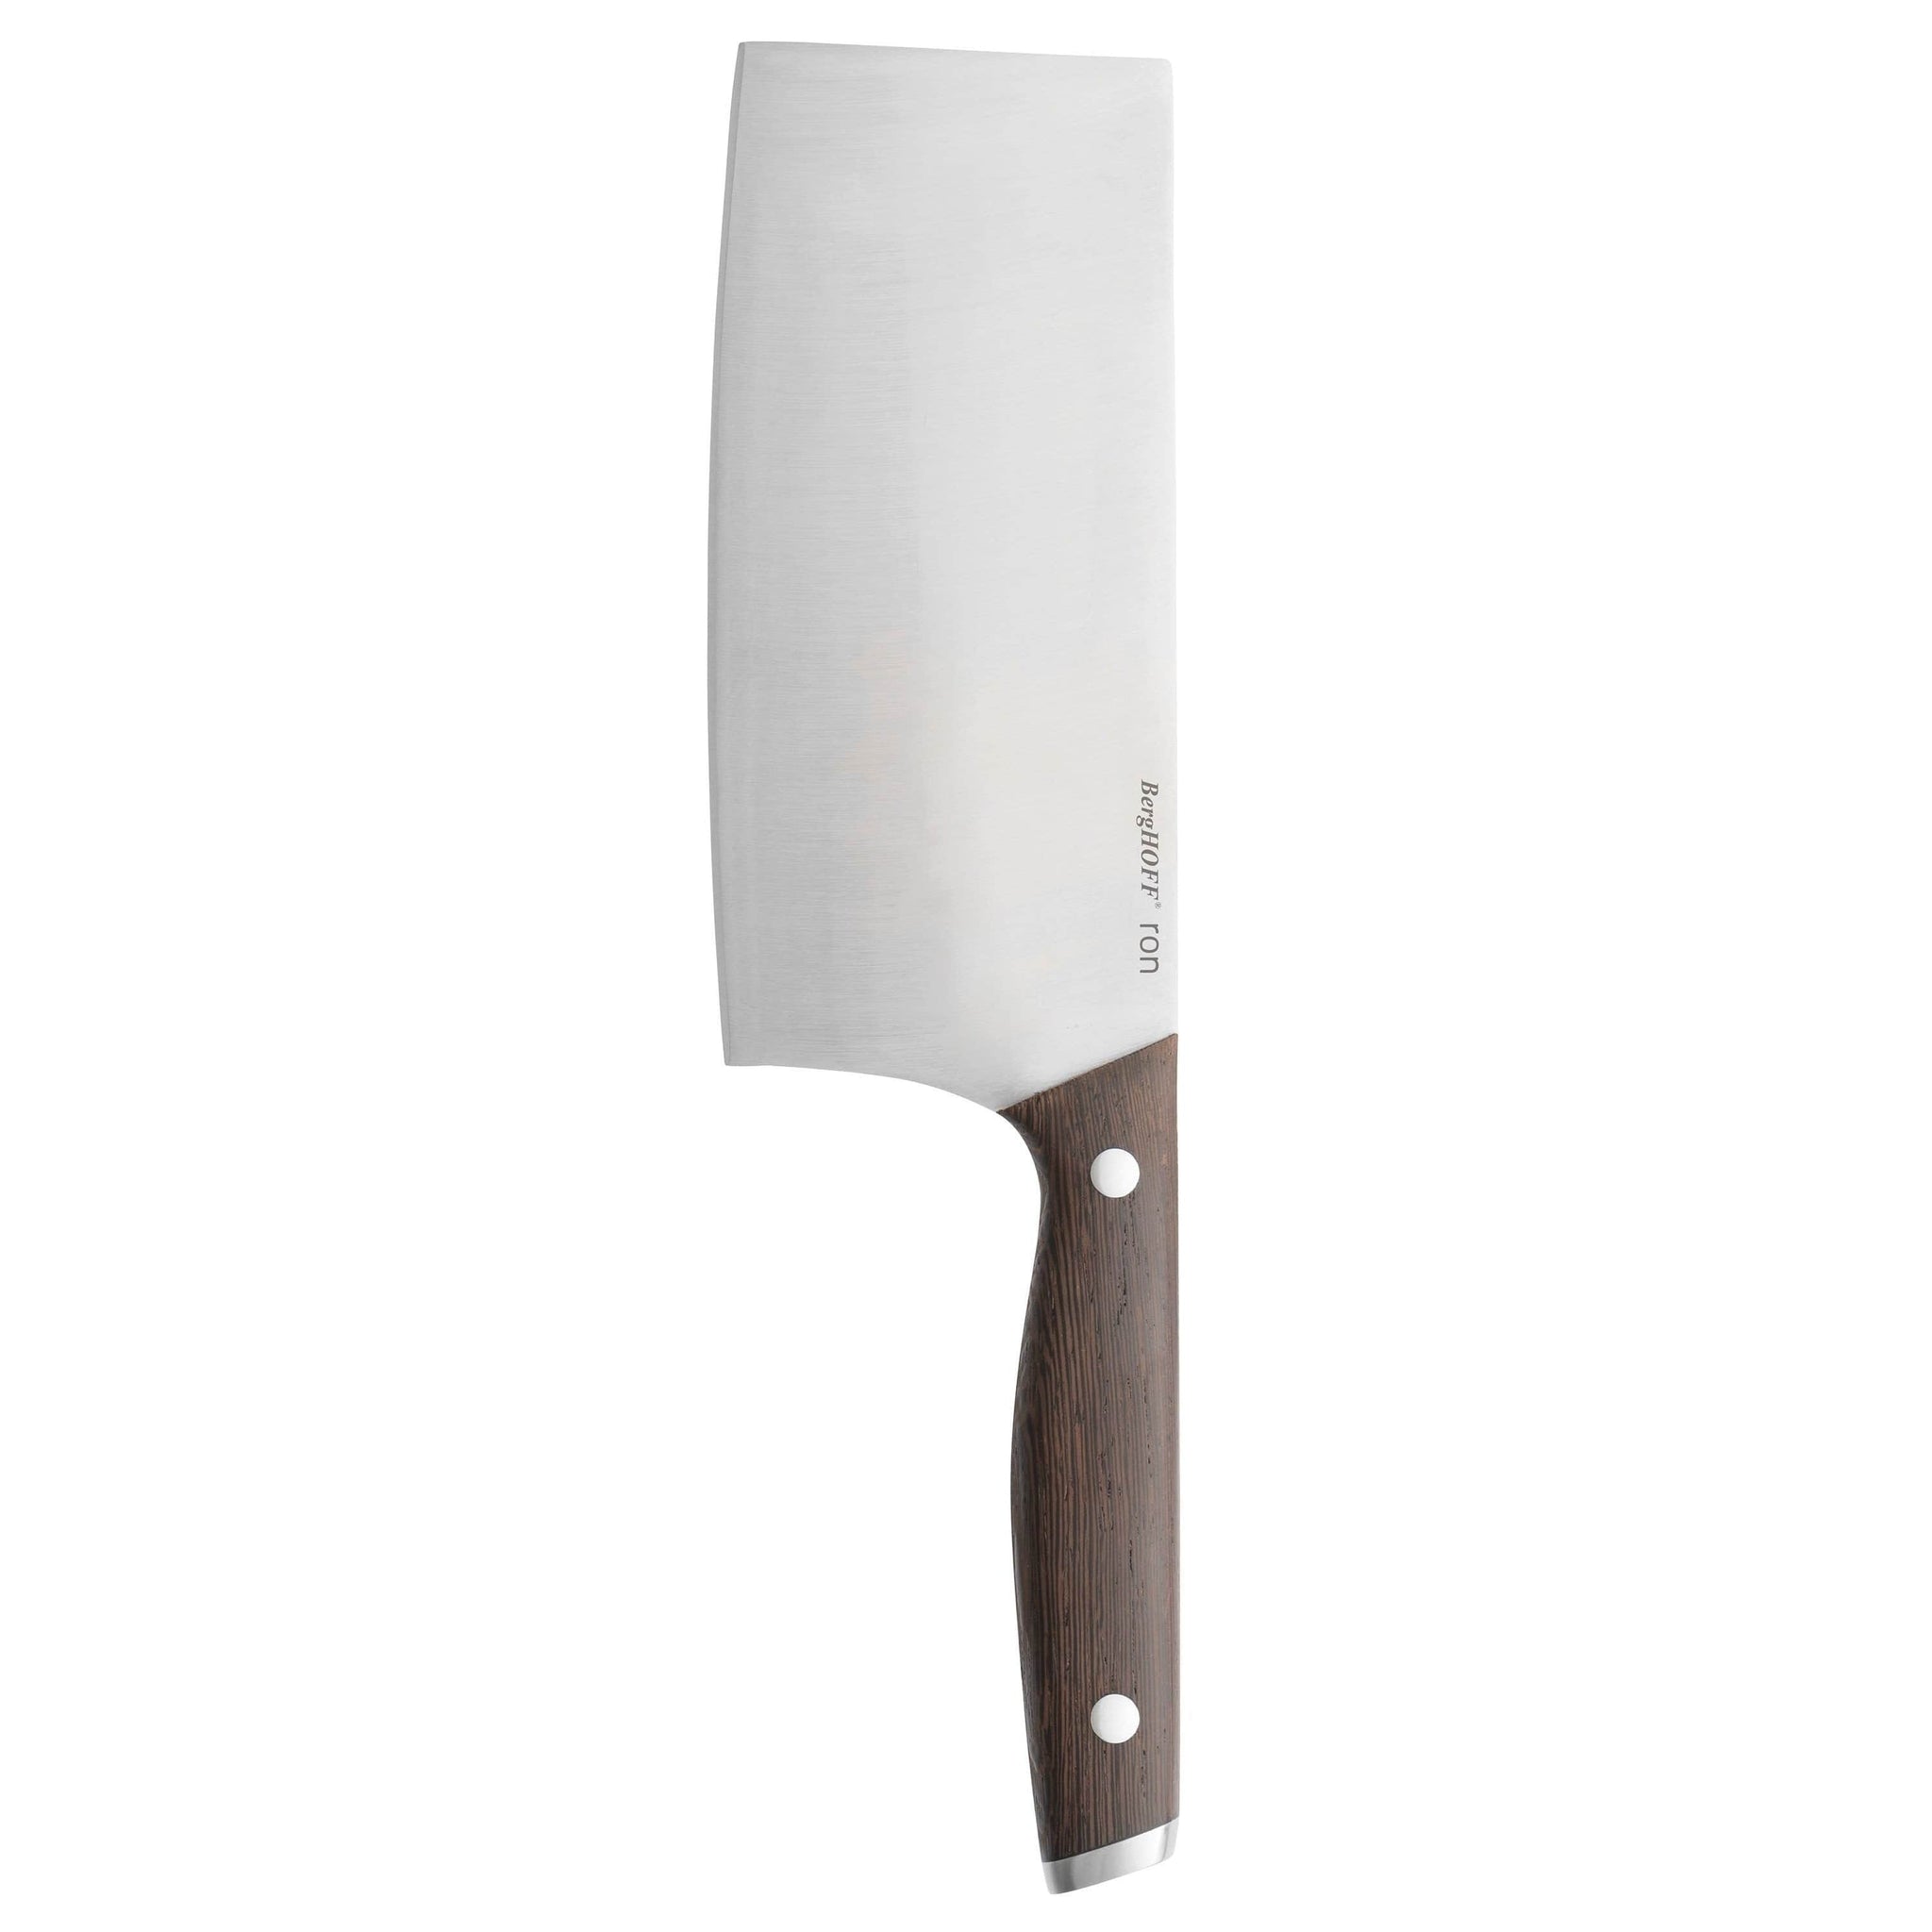 BergHOFF - Ron Cleaver with Dark Wooden Handle  - Stainless Steel - 30.5cm - 6600091